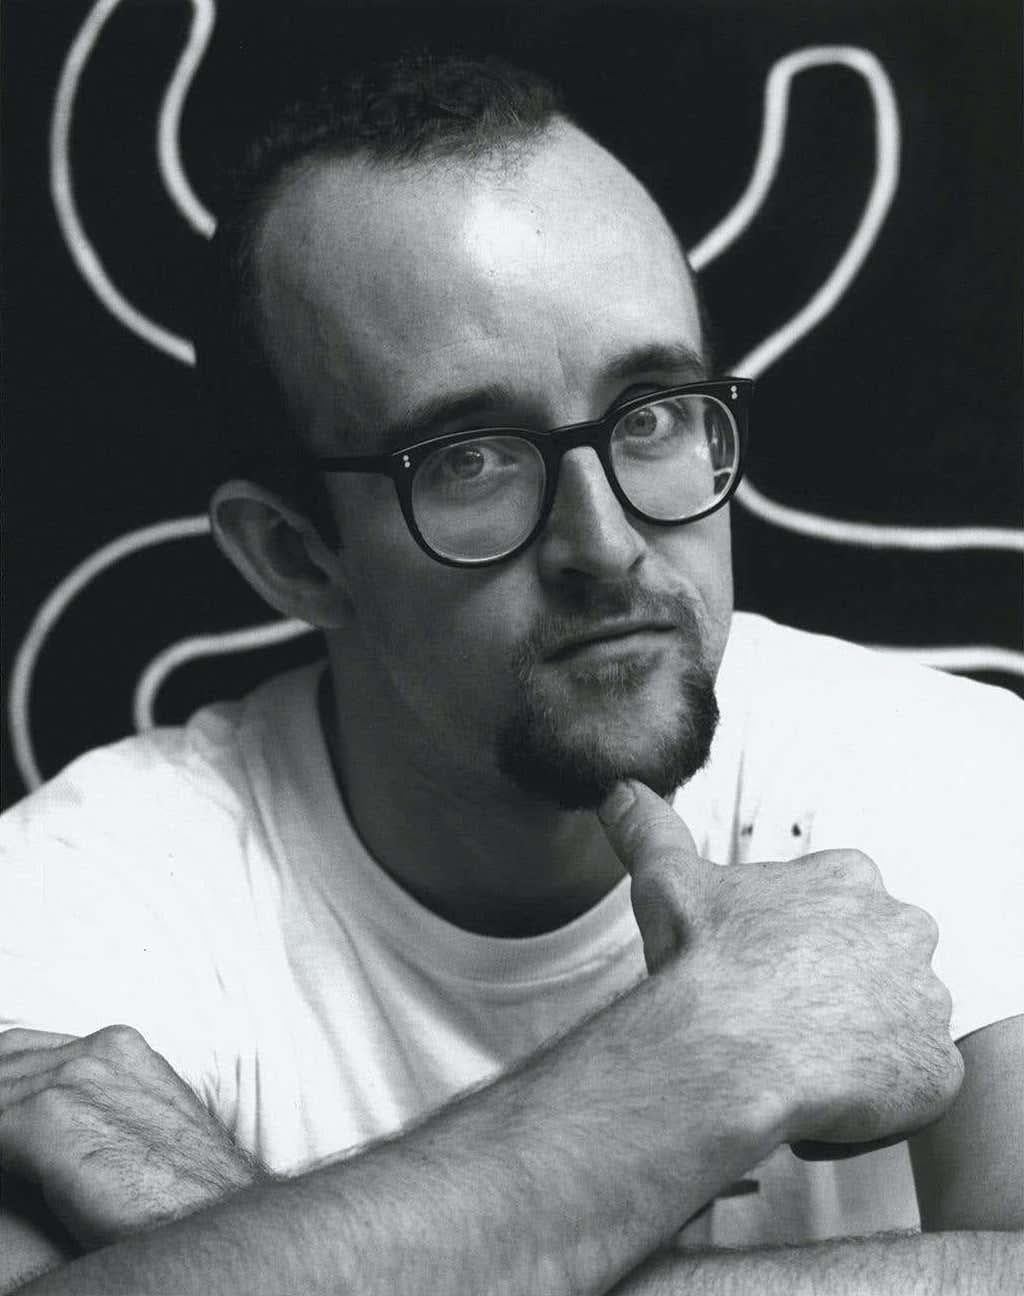 Keith Haring by Tseng Kwong Chi:
Rare vintage original press photograph by Keith Haring's close friend and world renown photographer, Tseng Kwong Chi. Stamped on the reverse.

Silver gelatin print circa 1989. 
8x10 inches.
Very good overall vintage